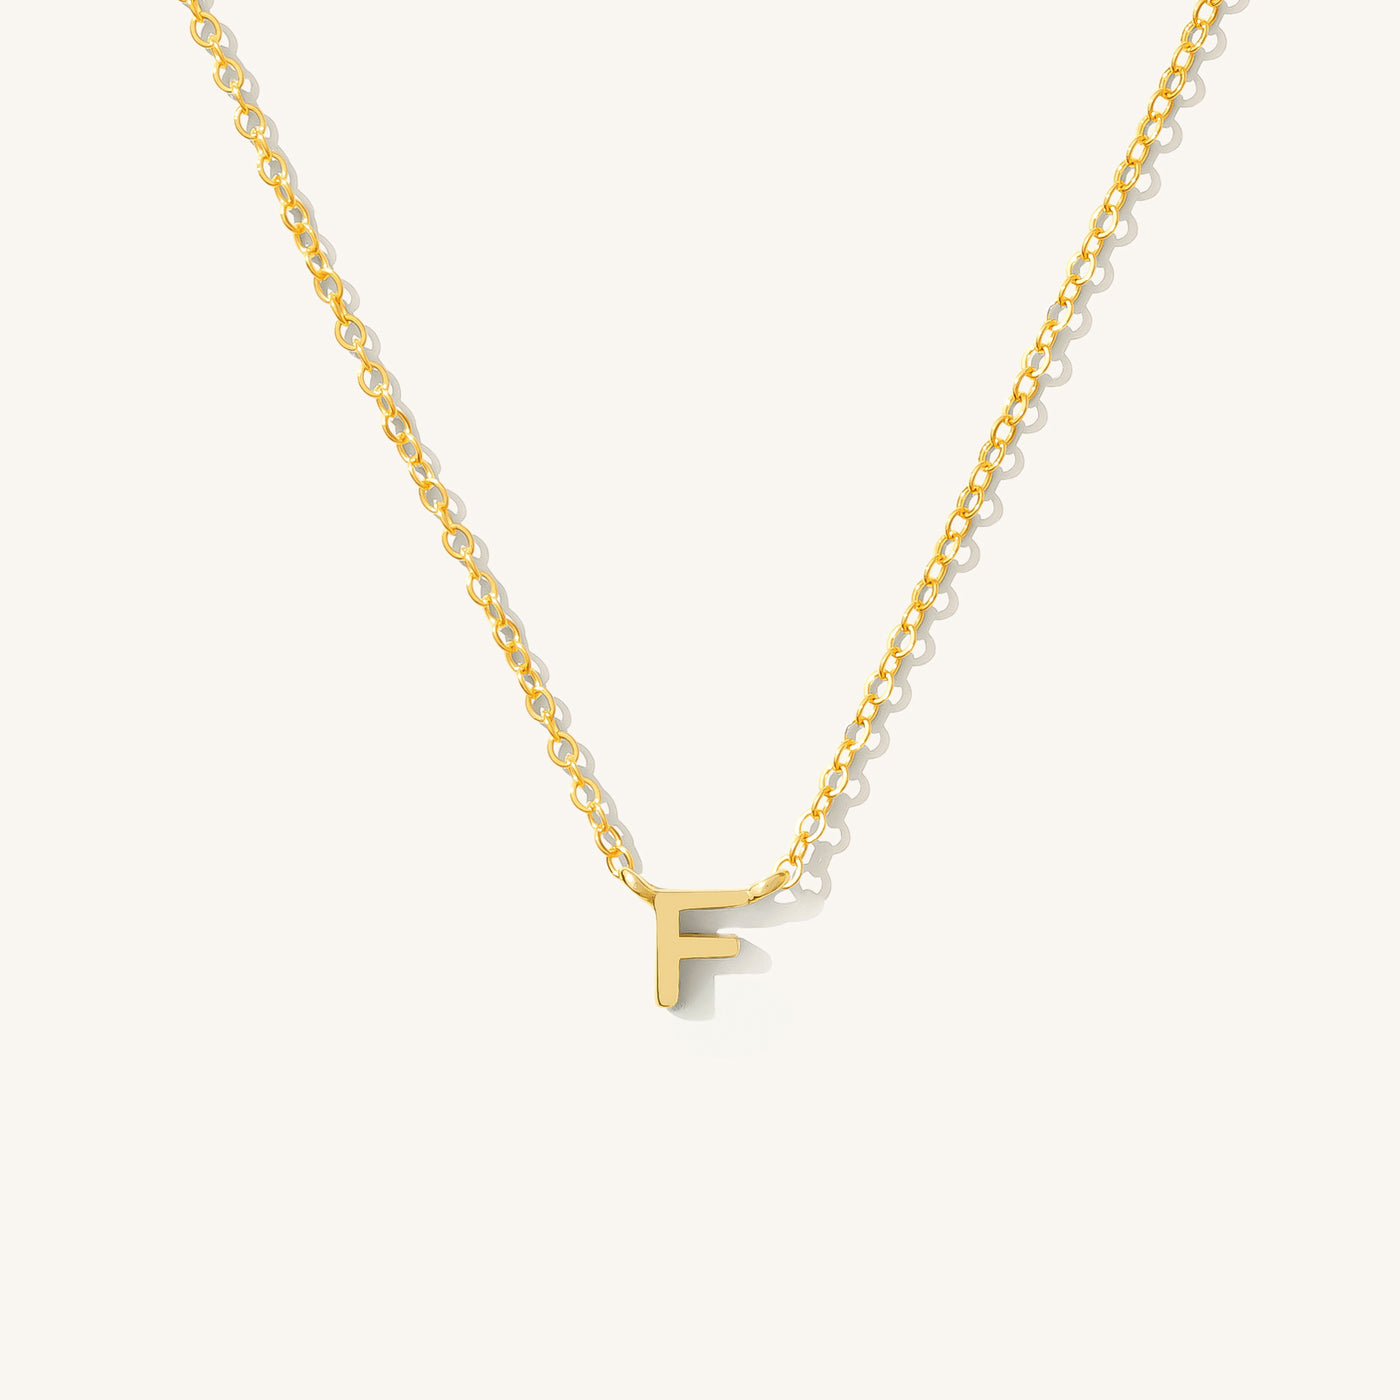 Buy Small Alphabet Necklace, 14K Gold Necklace Small Letters, Dainty Gold  Initial Necklace Graduation Personalized Jewelry Gifts Online in India -  Etsy